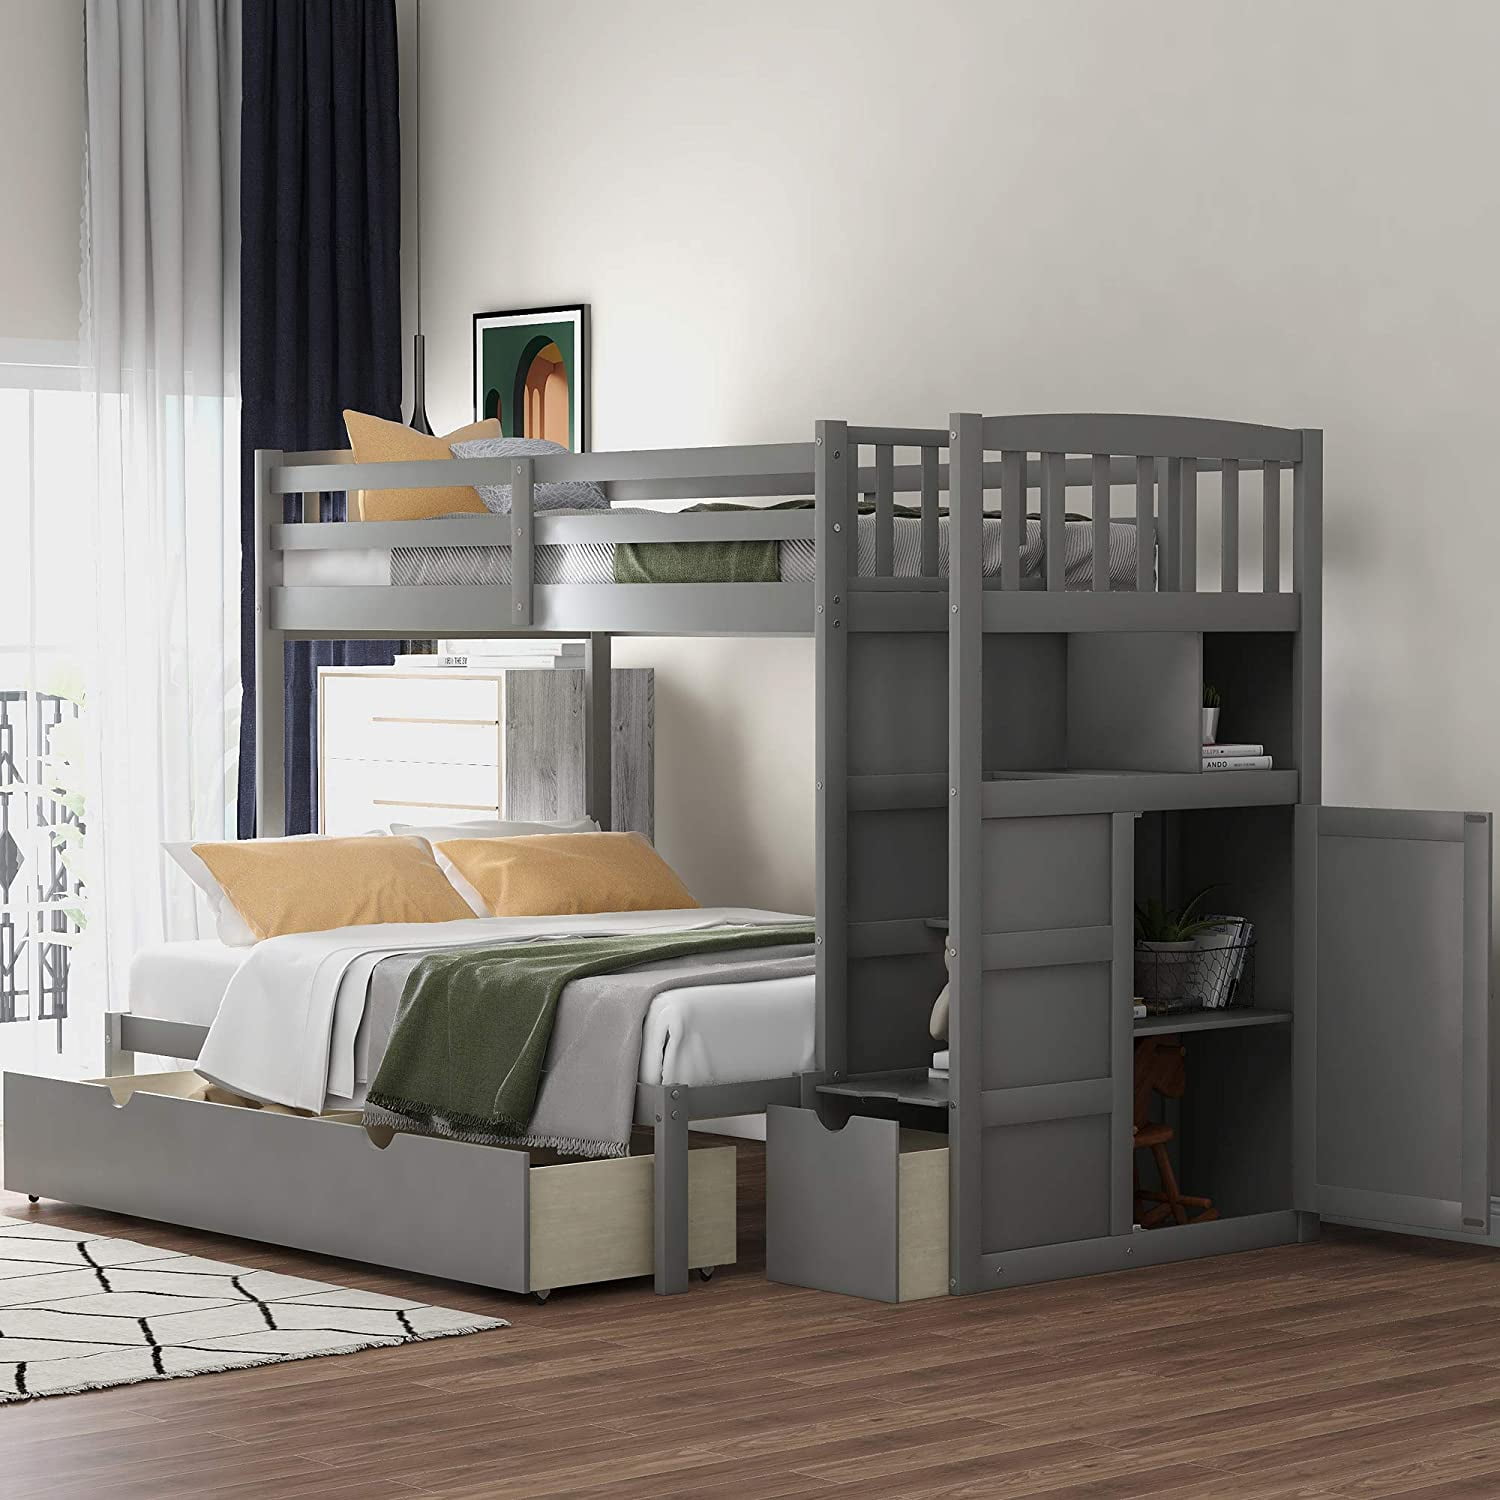 Bunk Bed Twin Over Full Beds With, Bunk Bed With Full Bed On Bottom